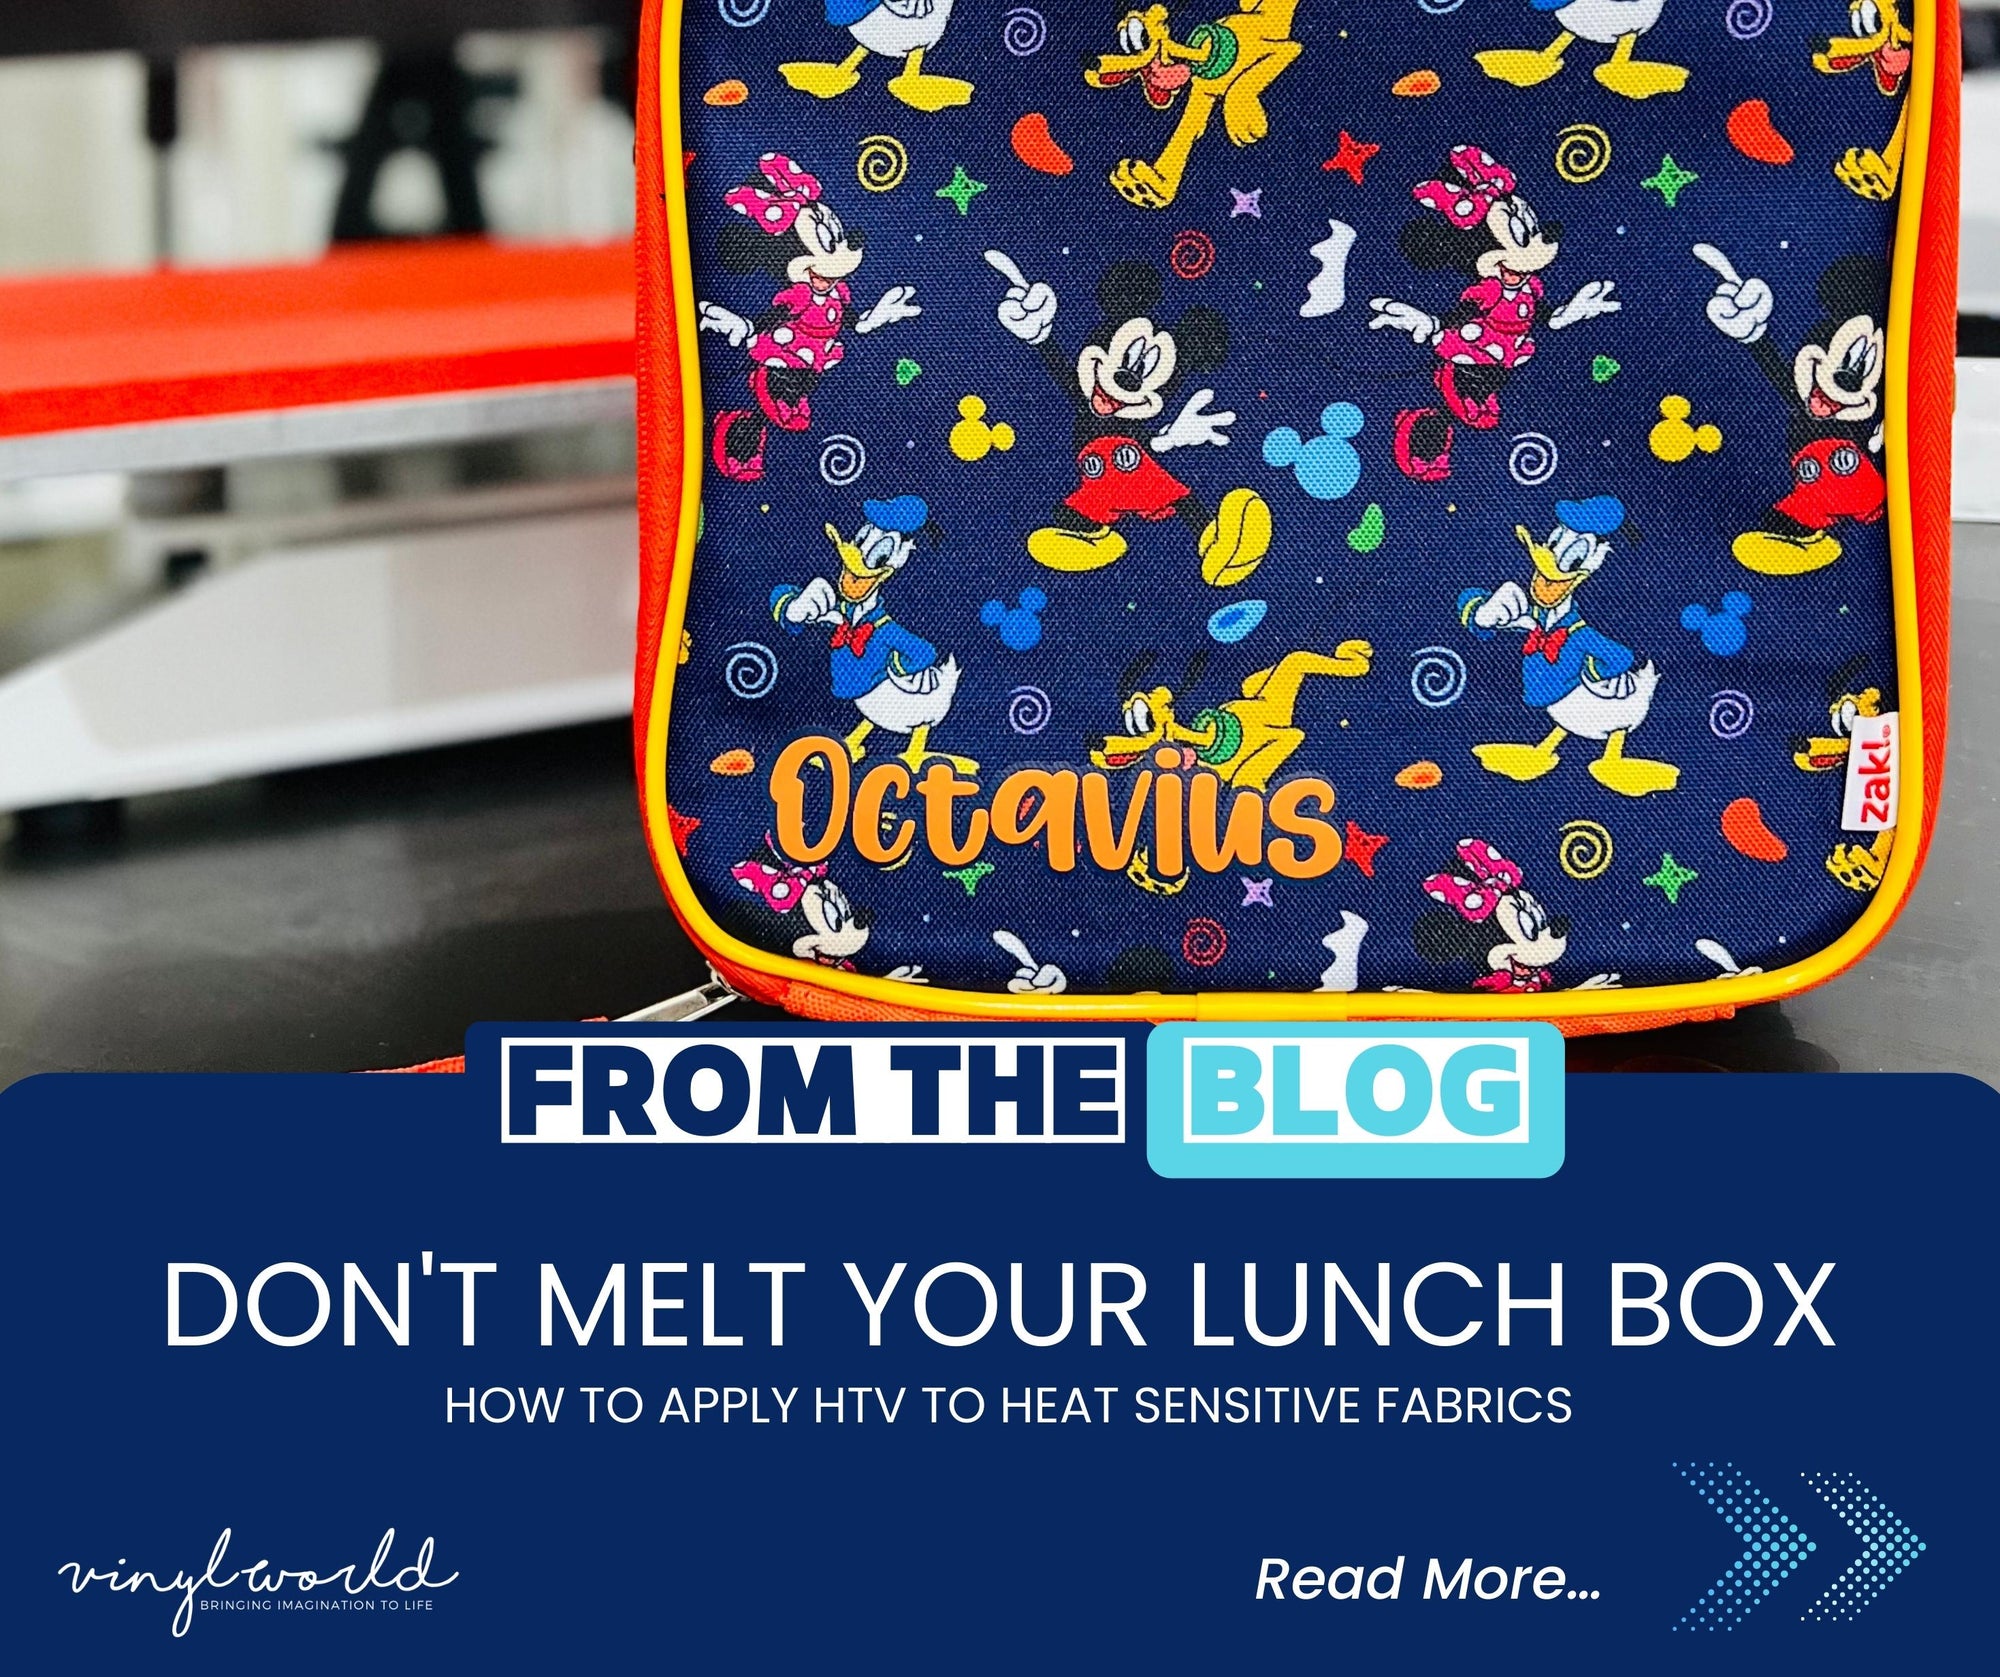 Don't melt your lunch box!